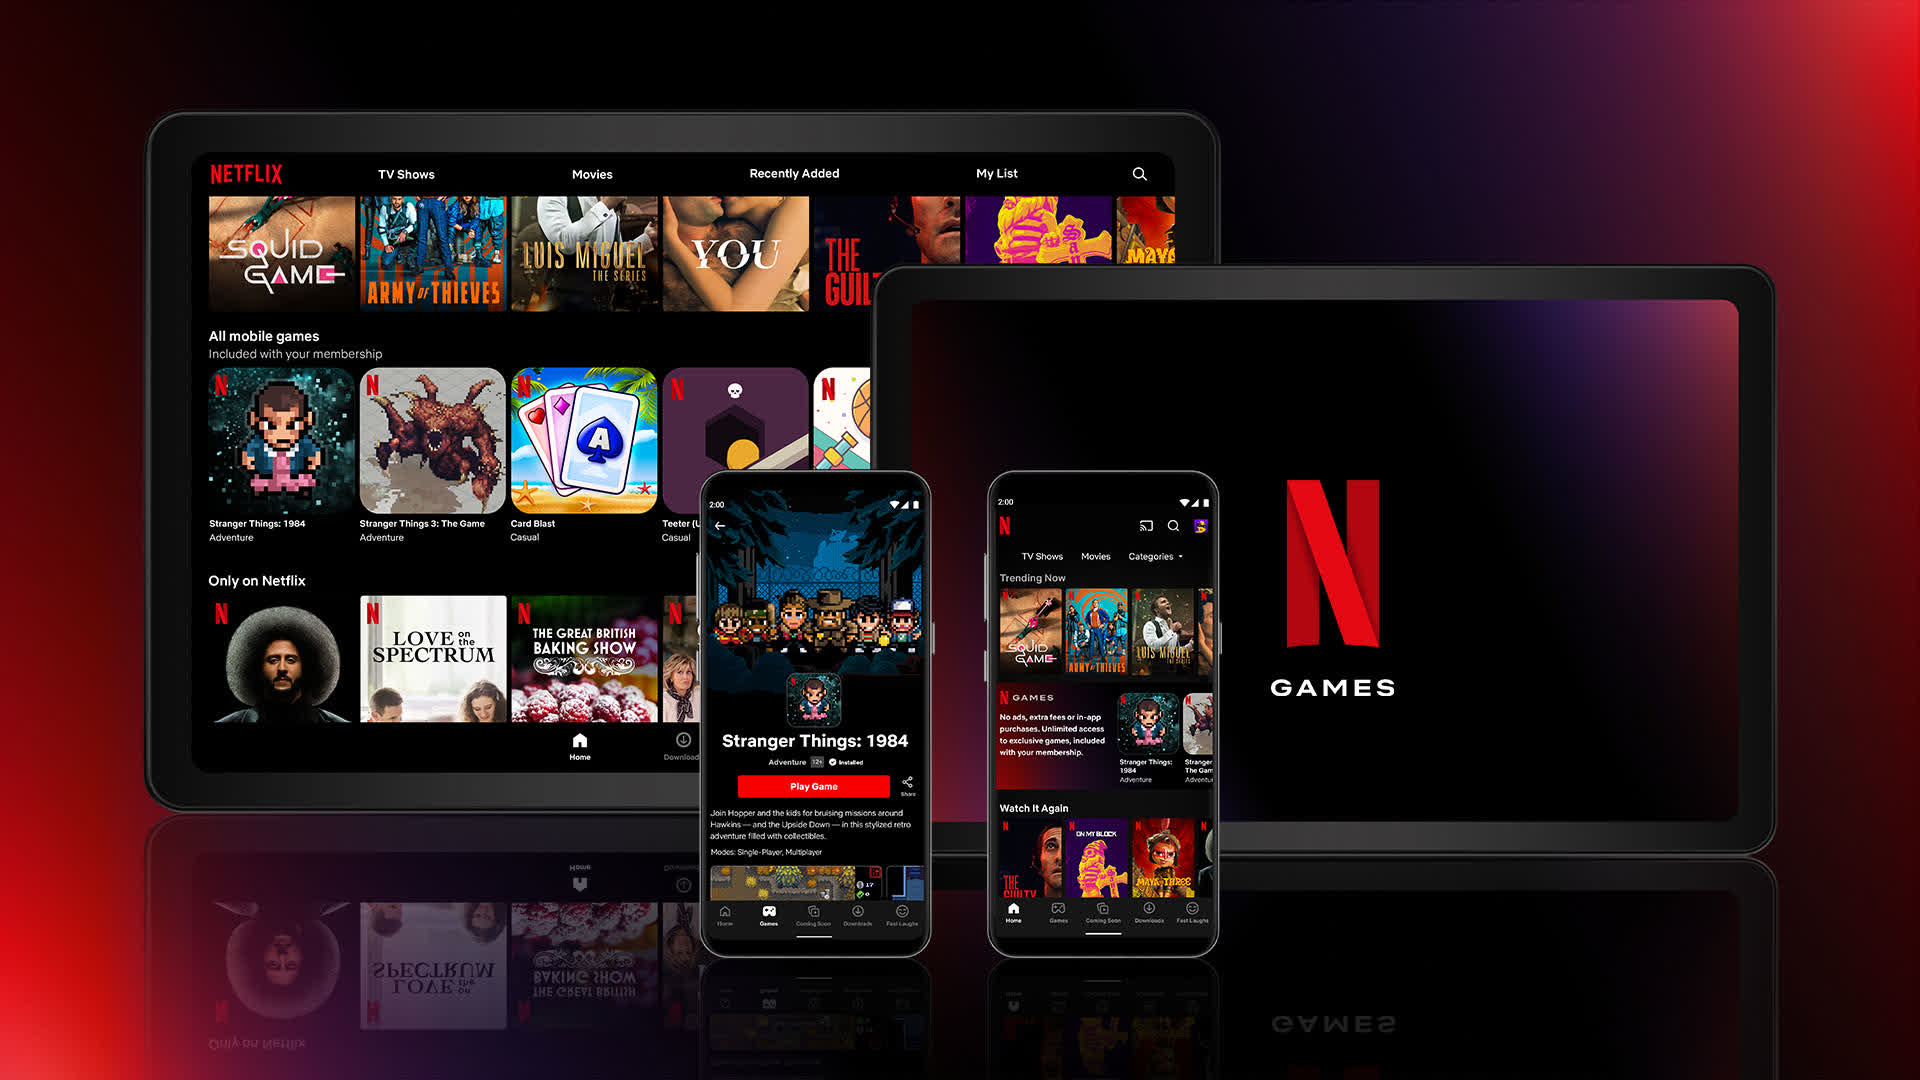 Netflix games on your TV could be played using your smartphone as a controller